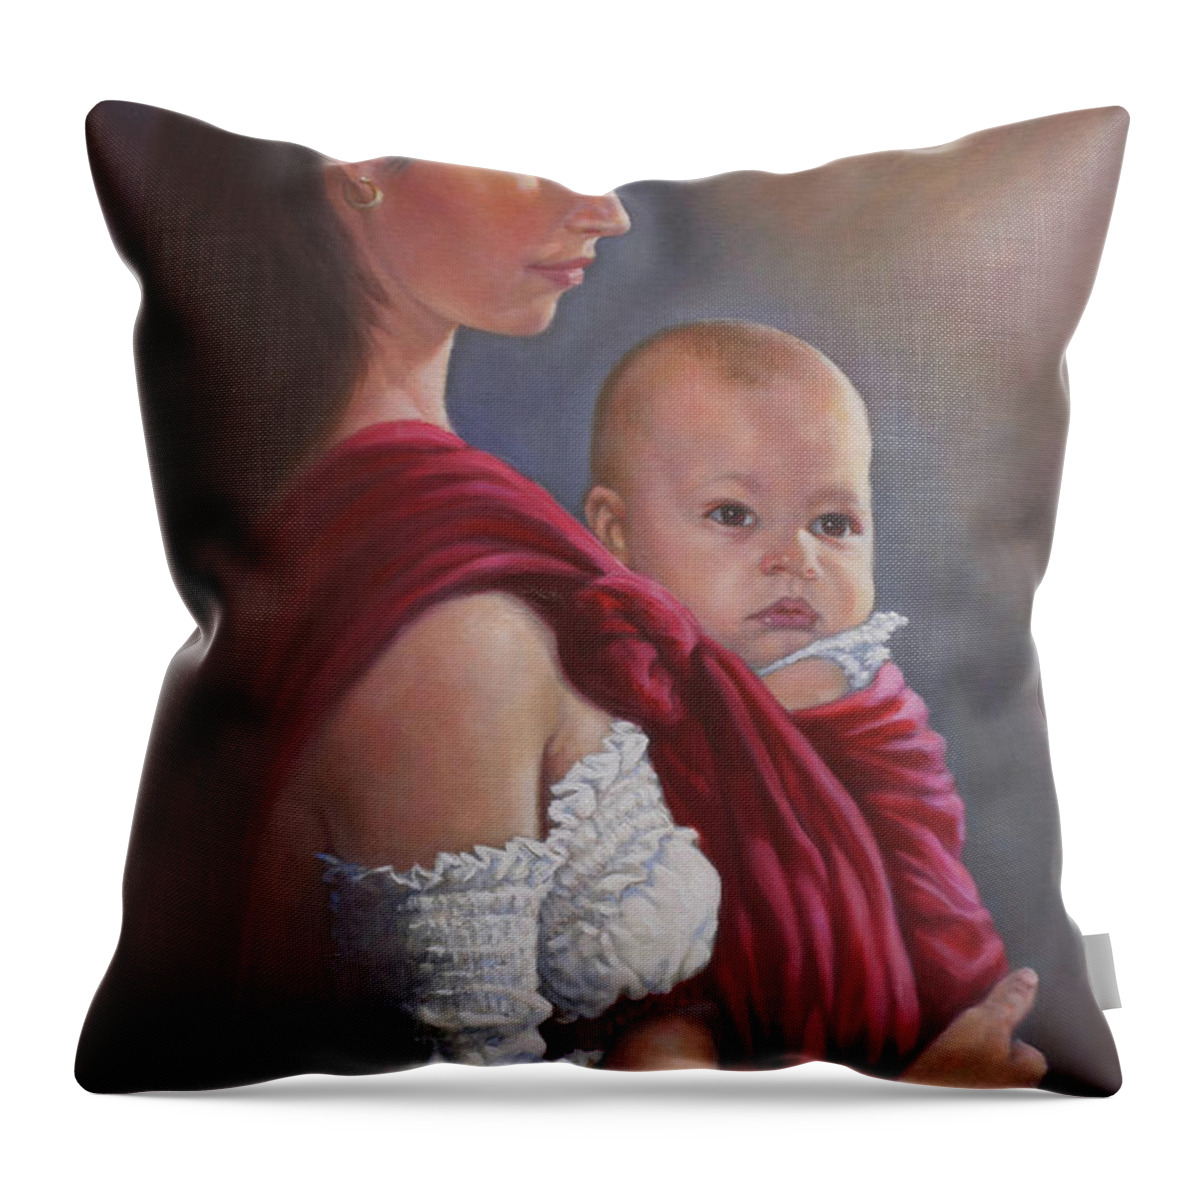 Mother And Child Throw Pillow featuring the painting Baby In Rebozo by Harvie Brown